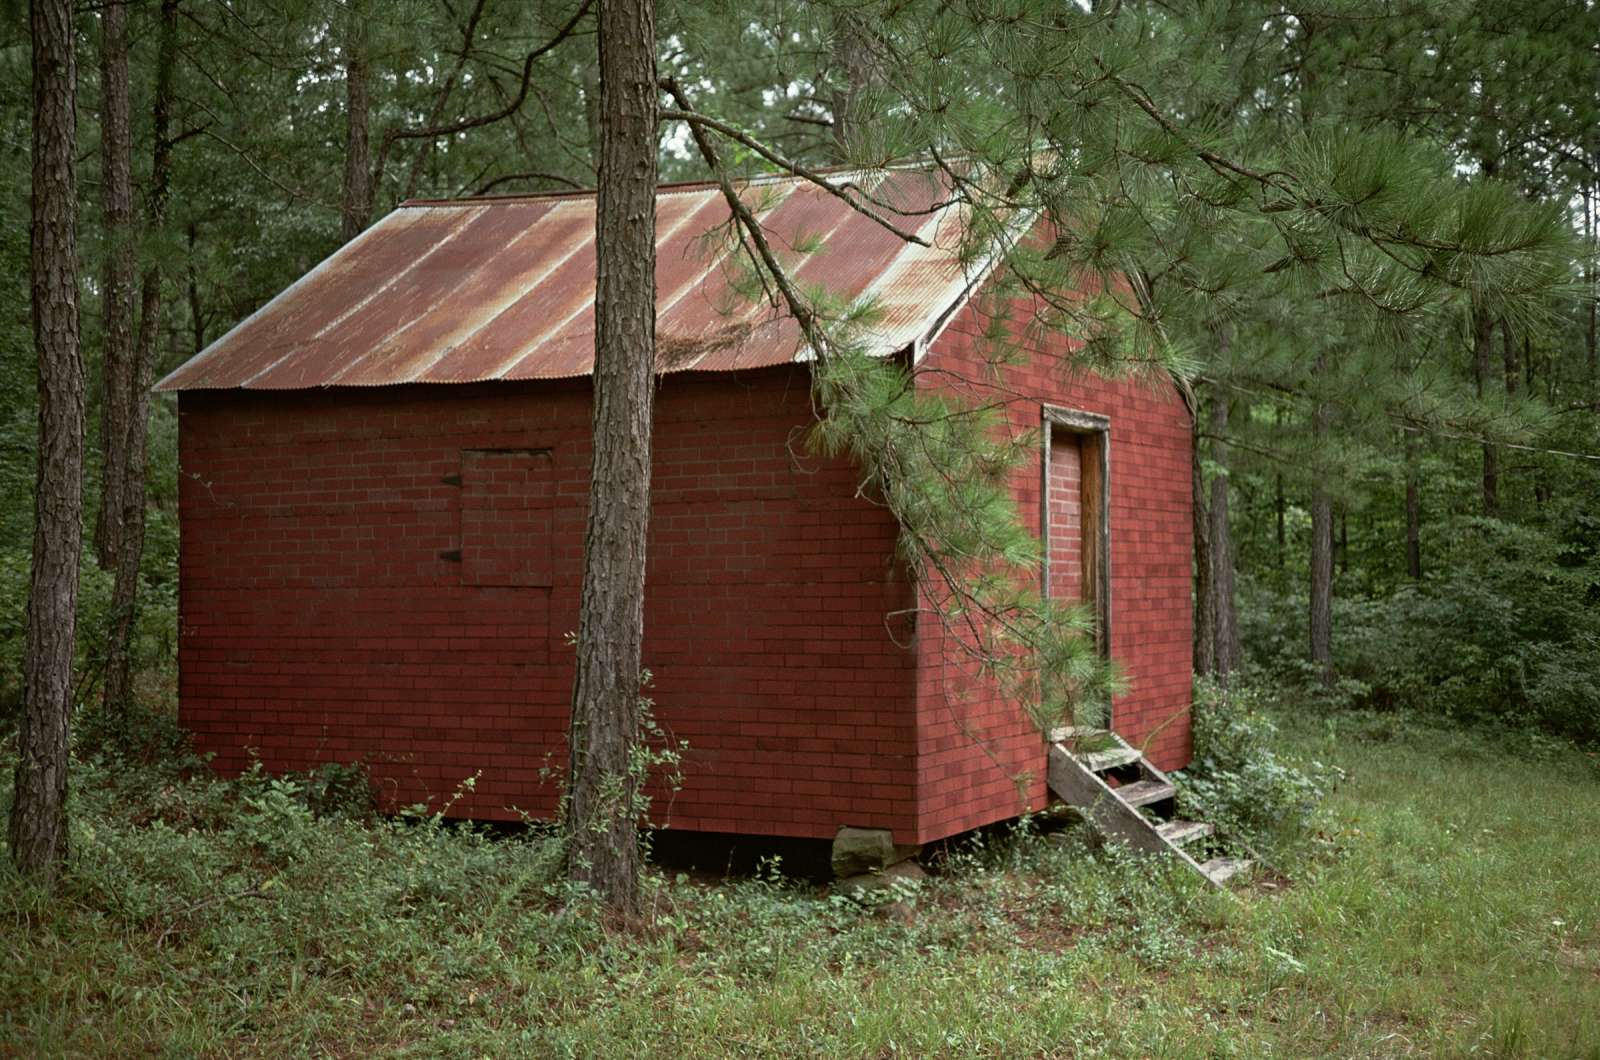 William A. Christenberry, Photographer of Rural South, Dies at 80 The New York Times: Art & Design 